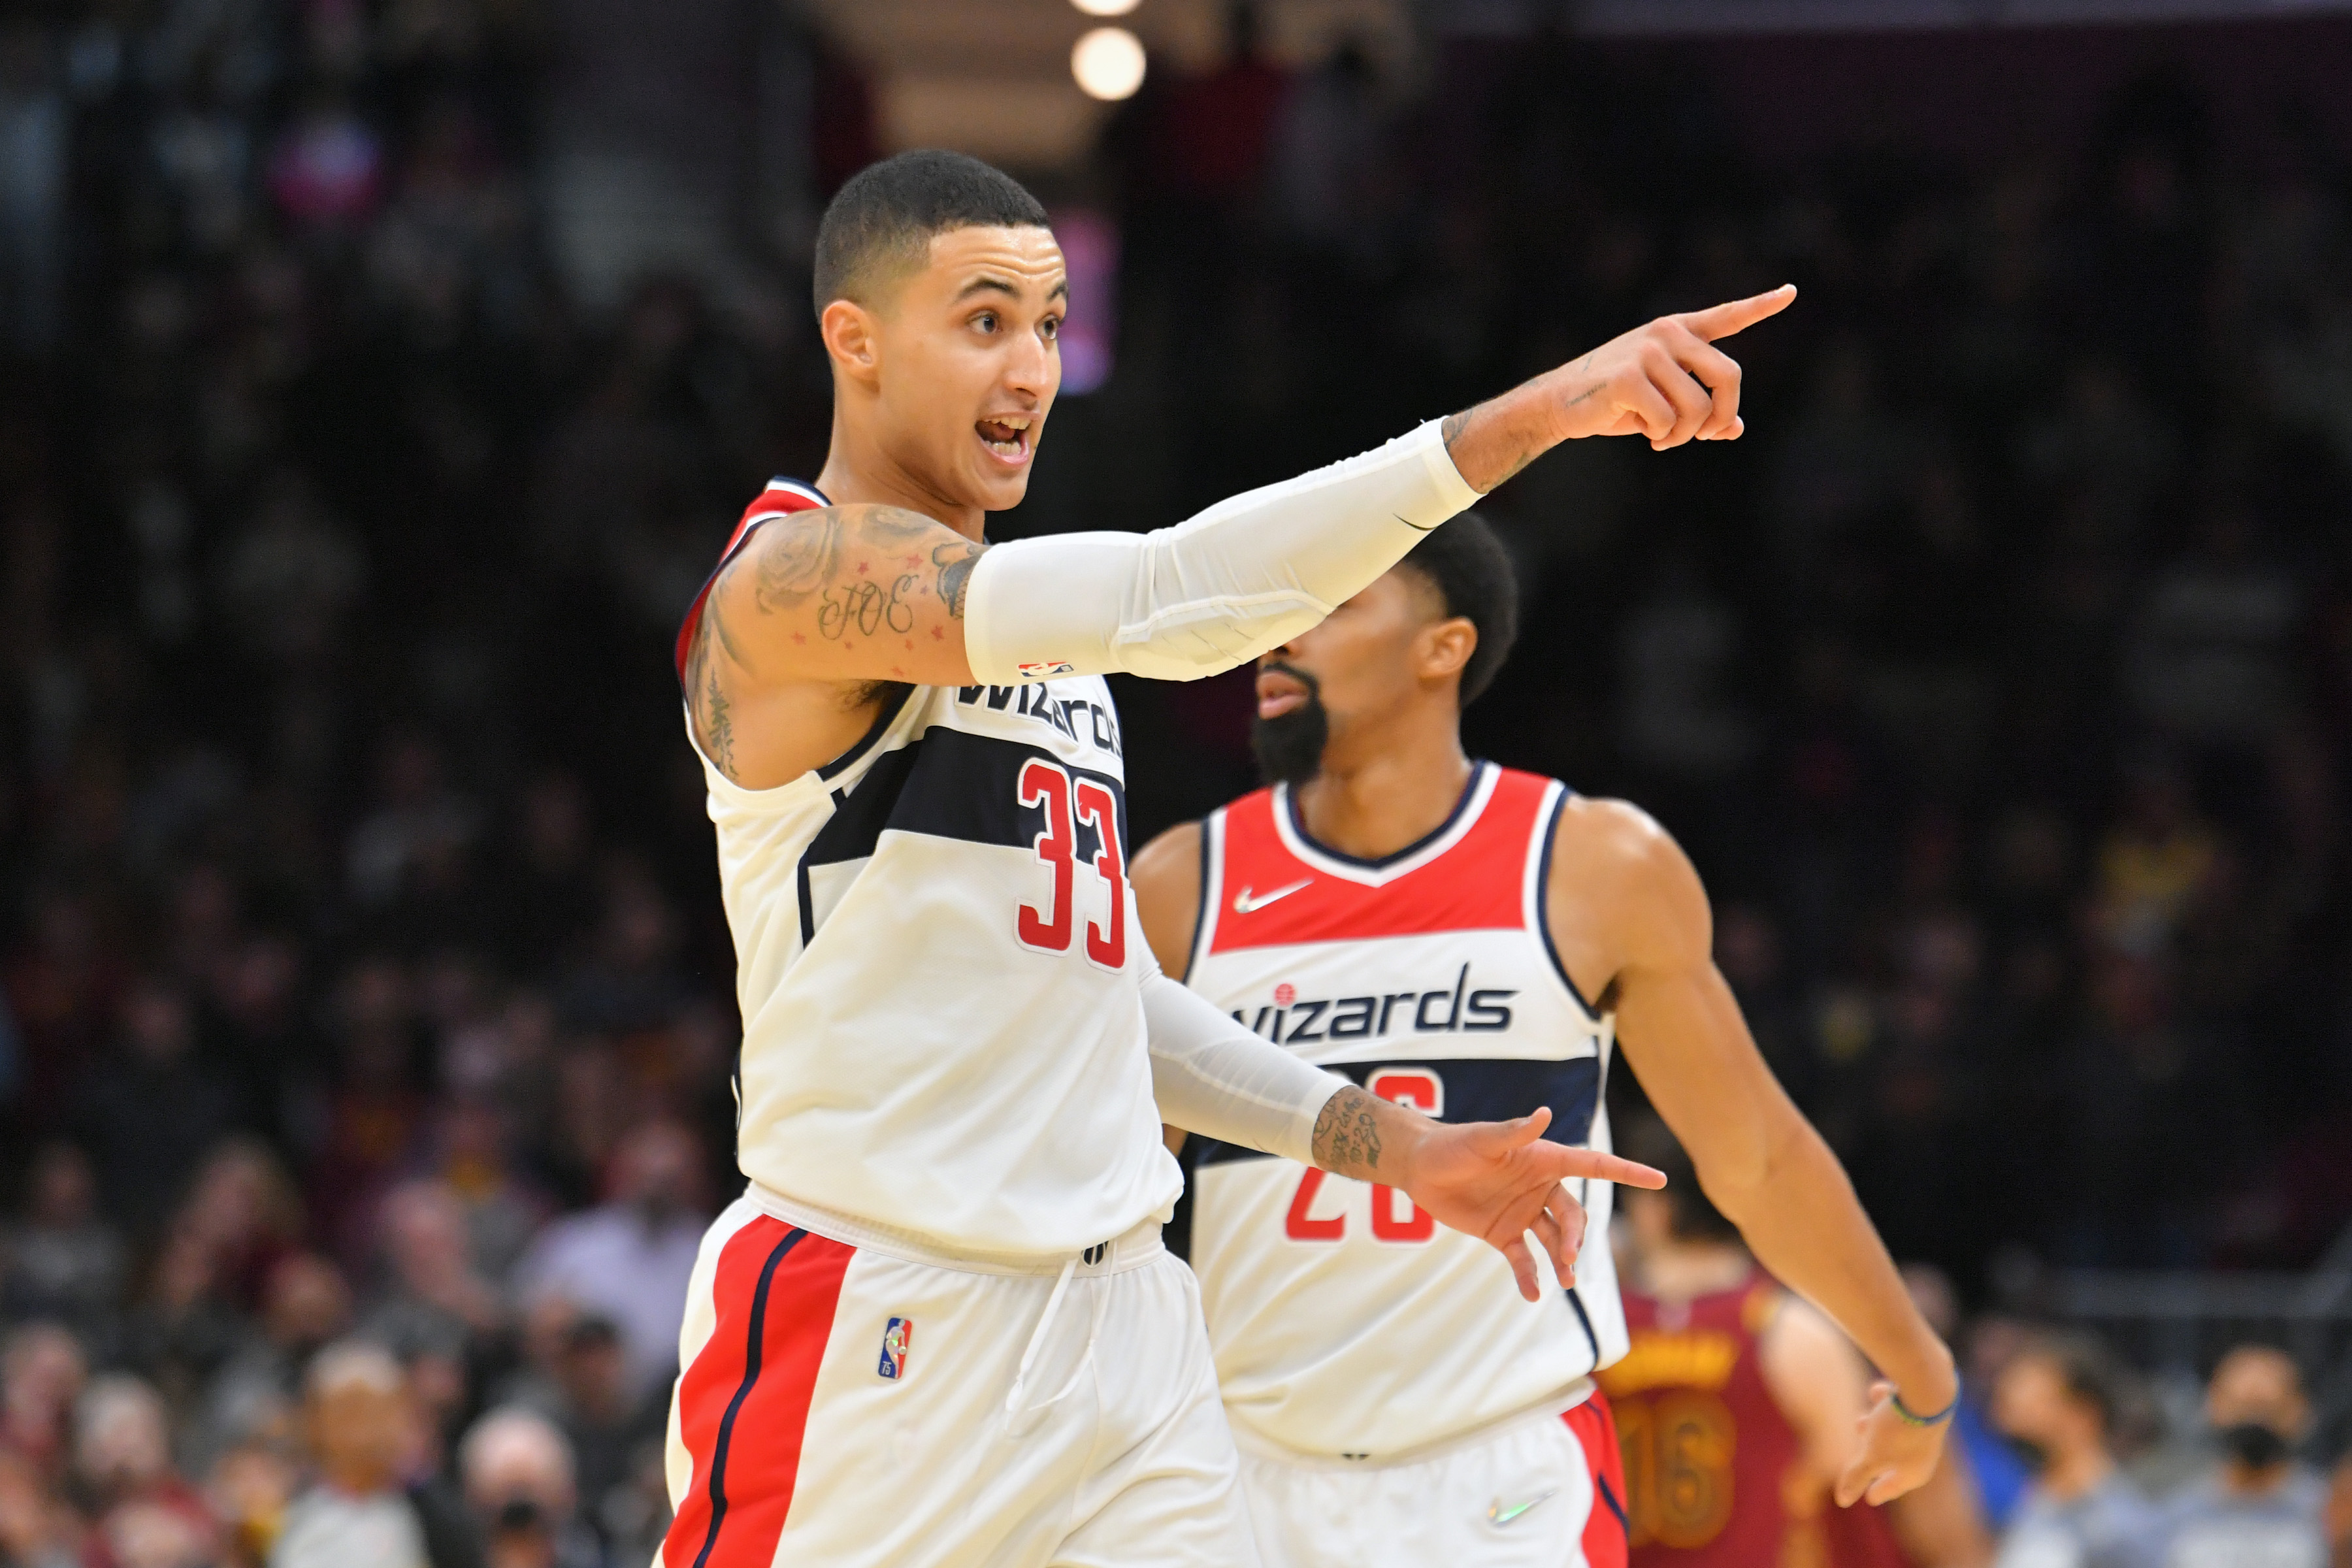 Washington Wizards forward Kyle Kuzma celebrates a game-winning three-pointer during a game against the Cleveland Cavaliers